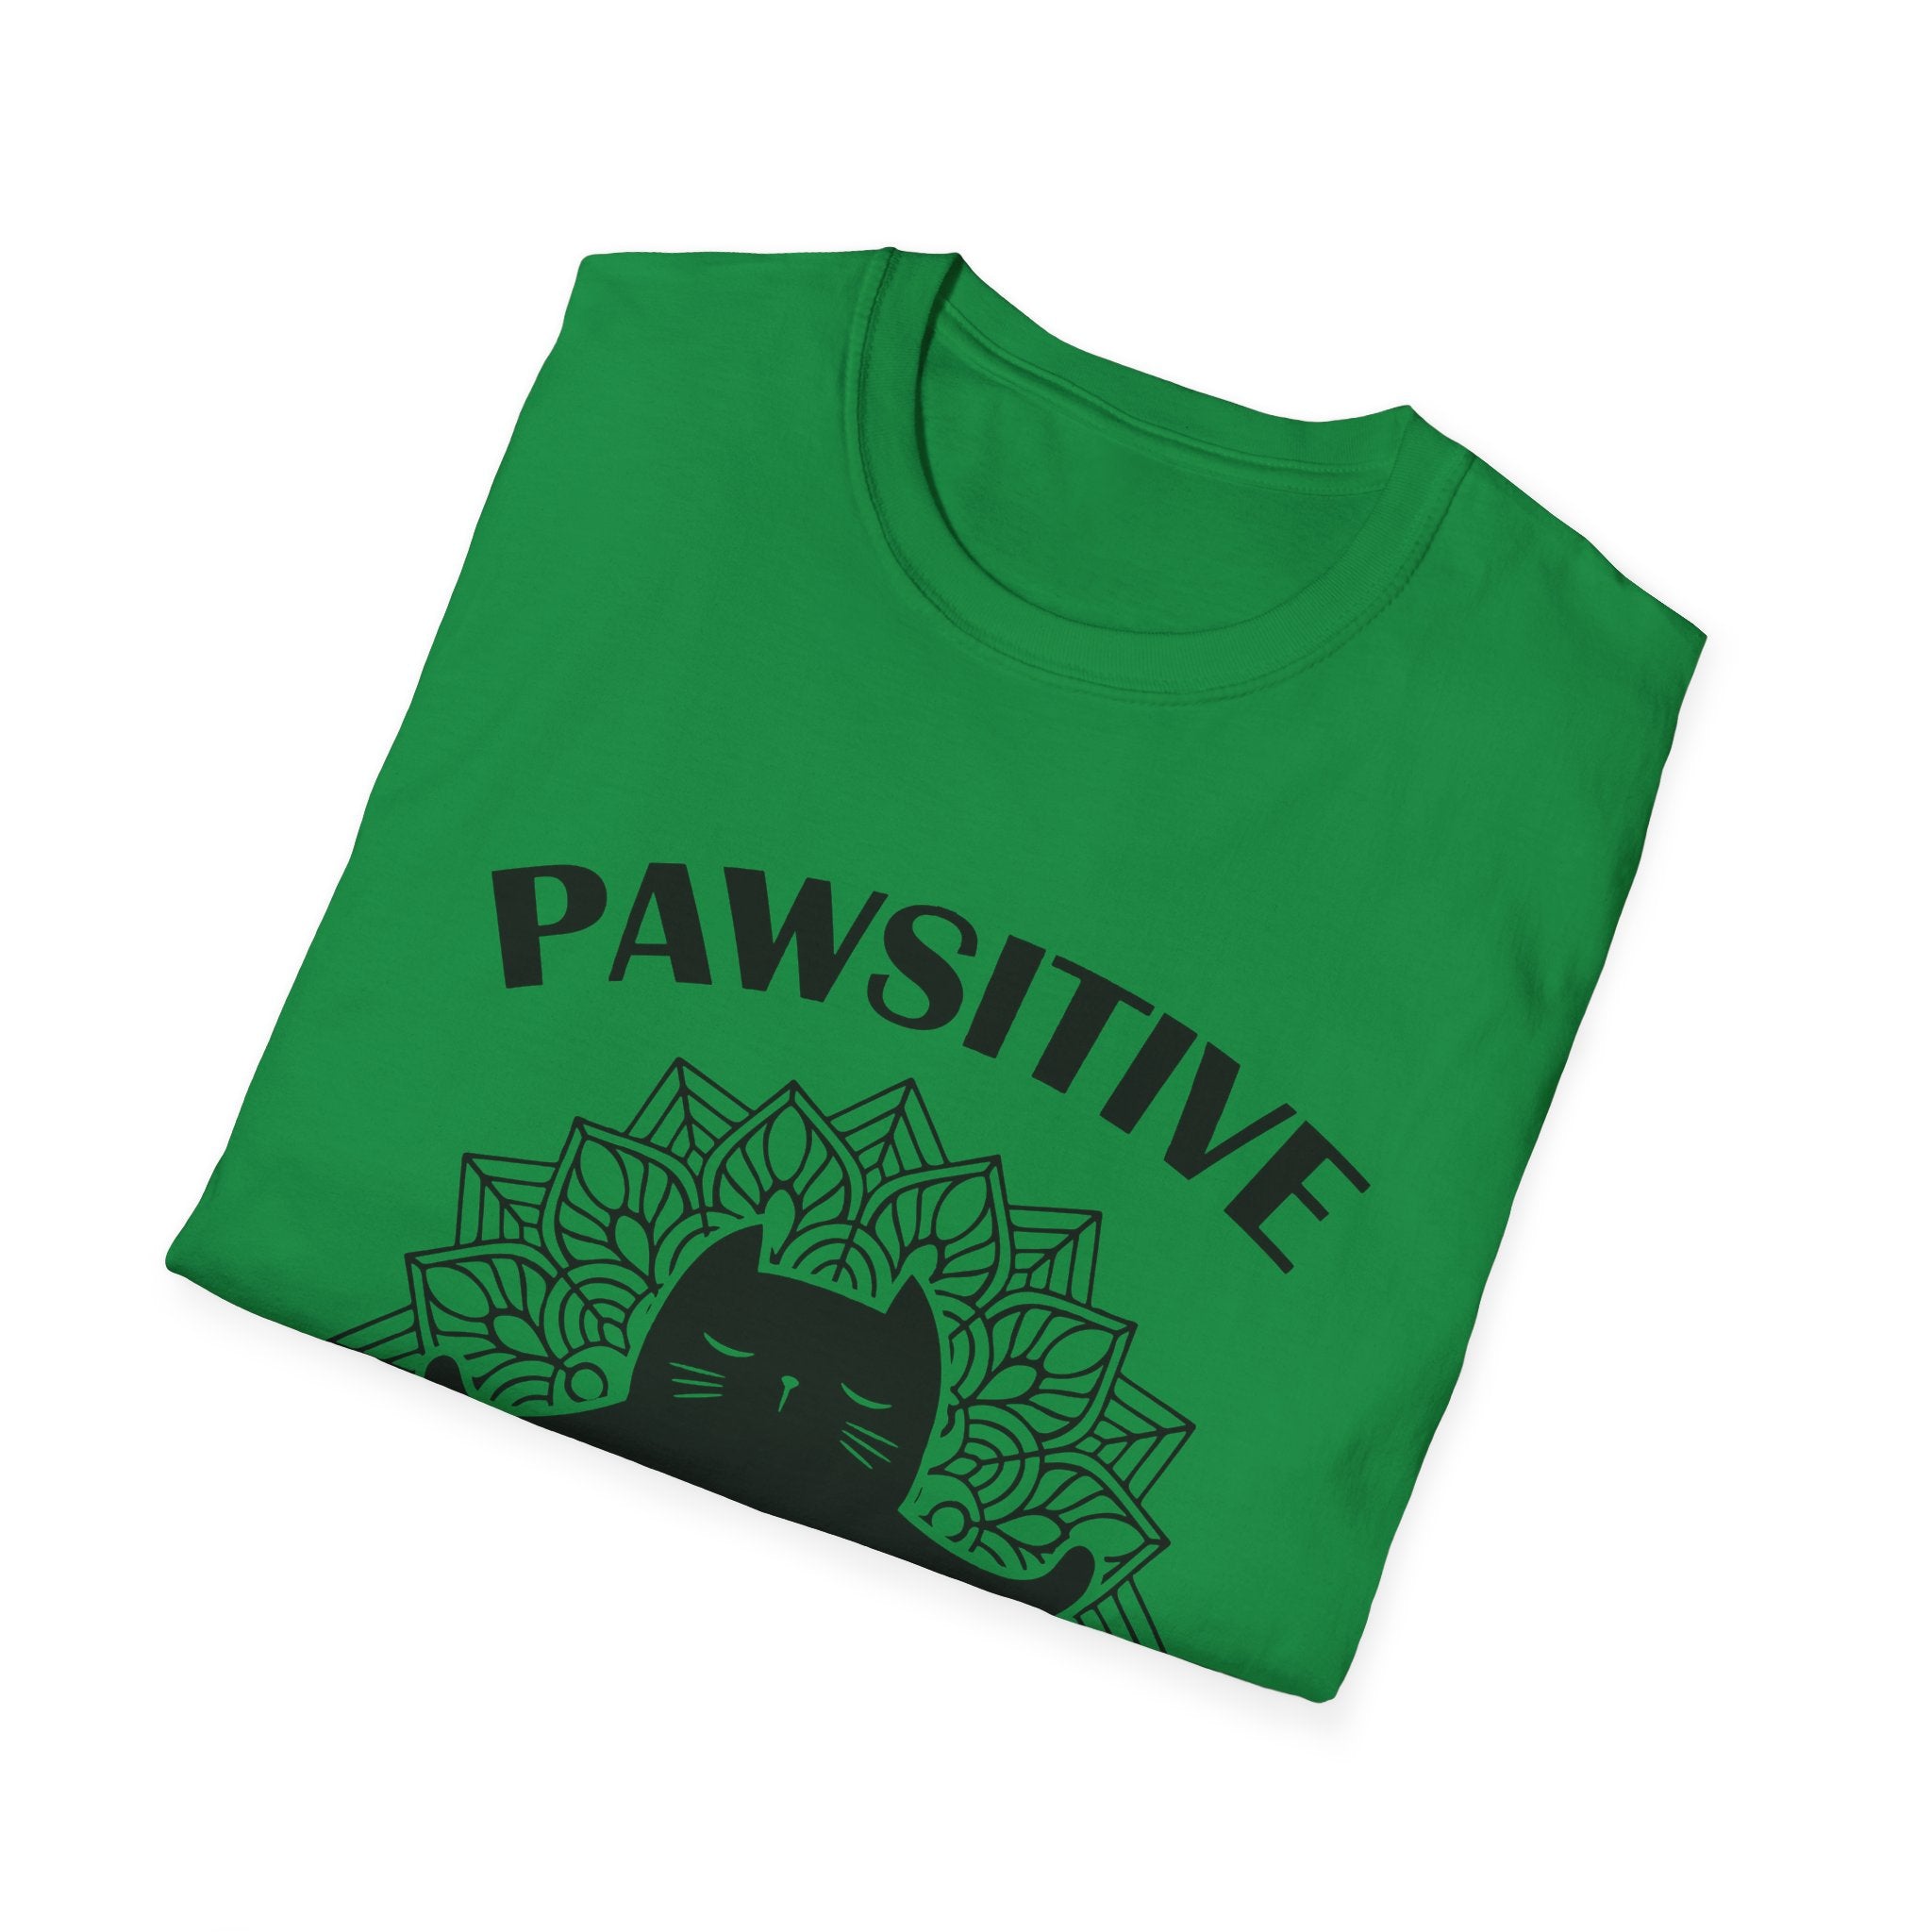 Pawsitive Vibes T-Shirt: Embrace the Zen with a Meditating Cat!